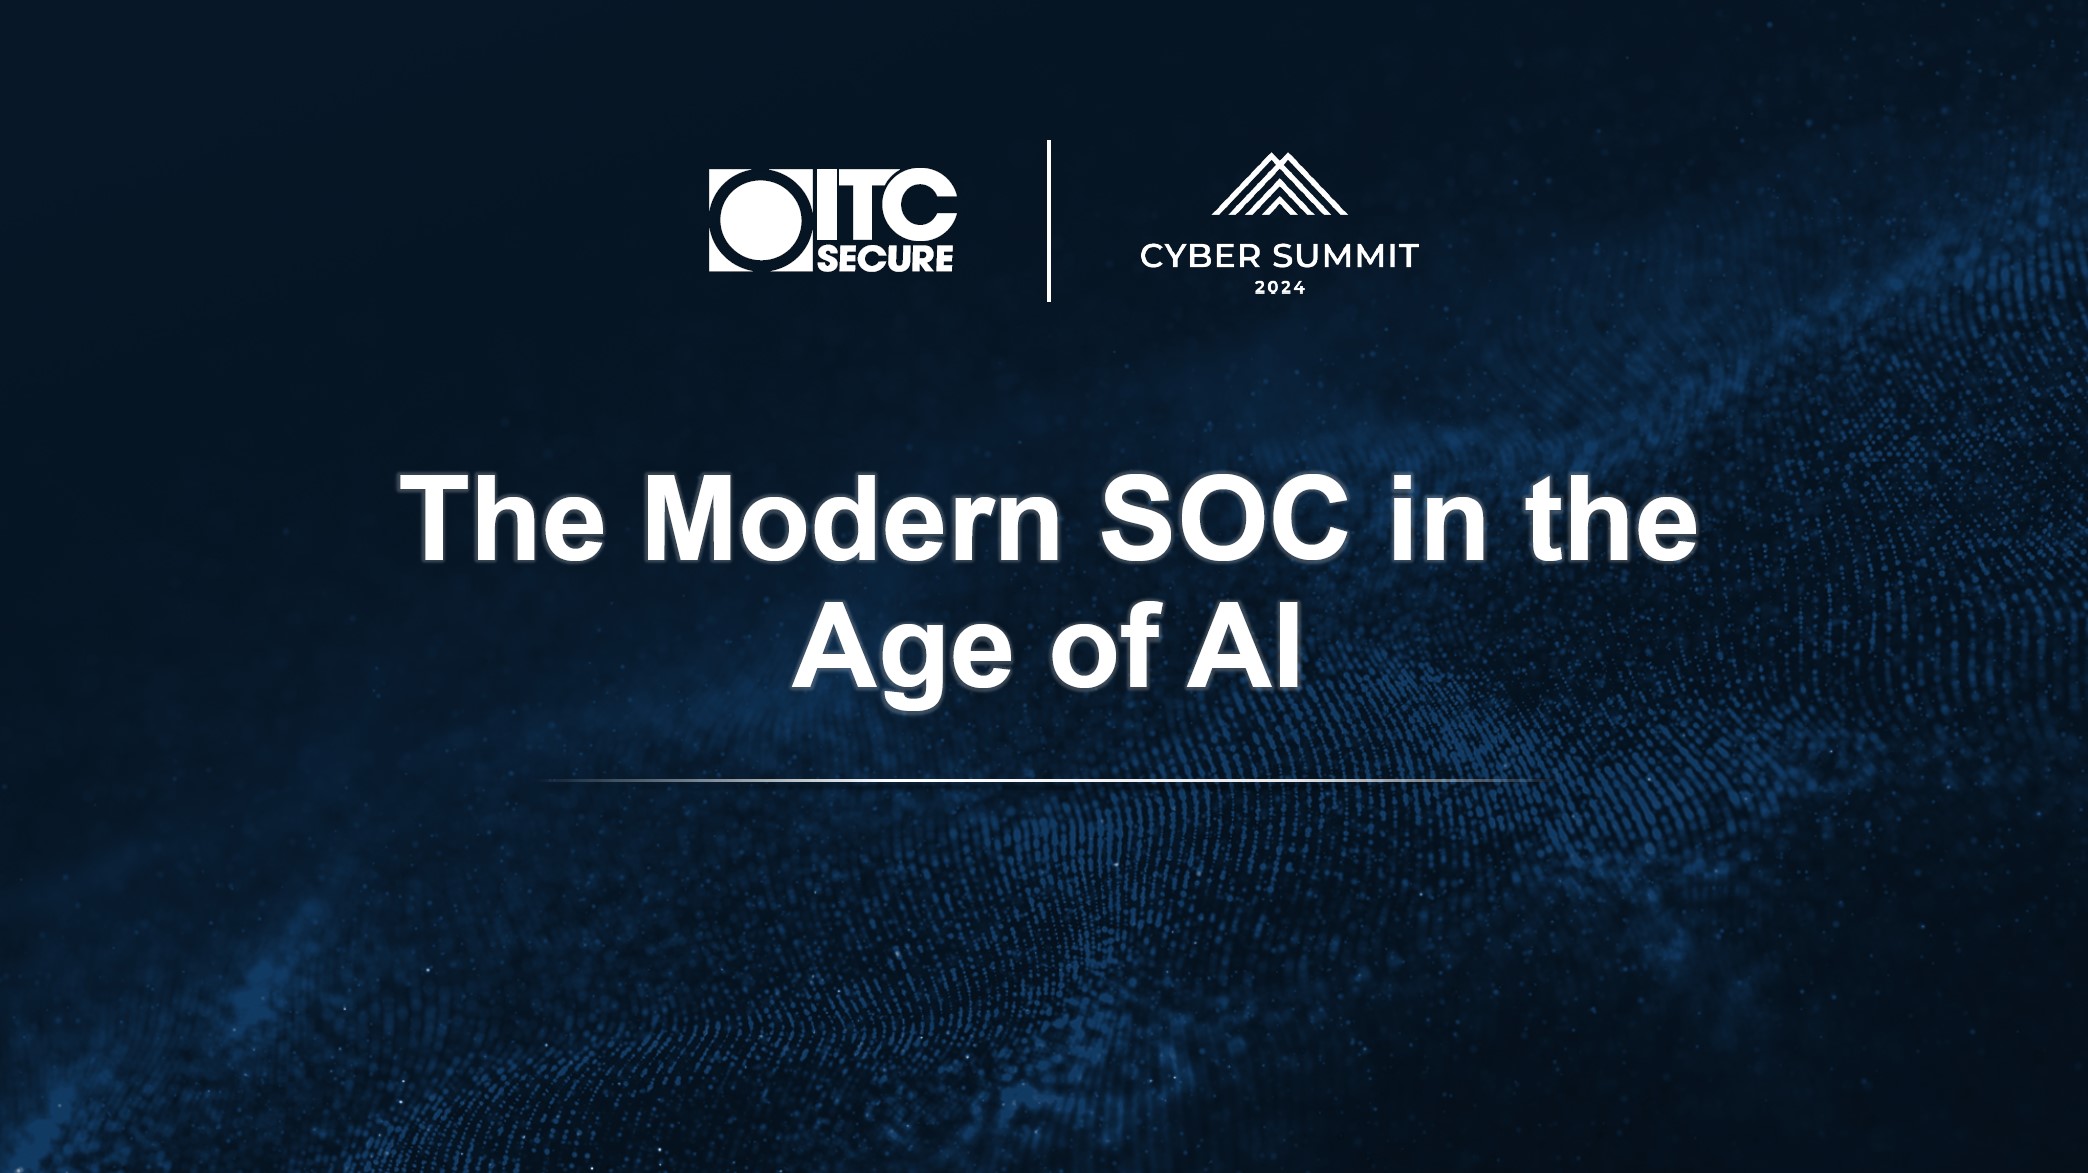 The Modern SOC in the Age of AI